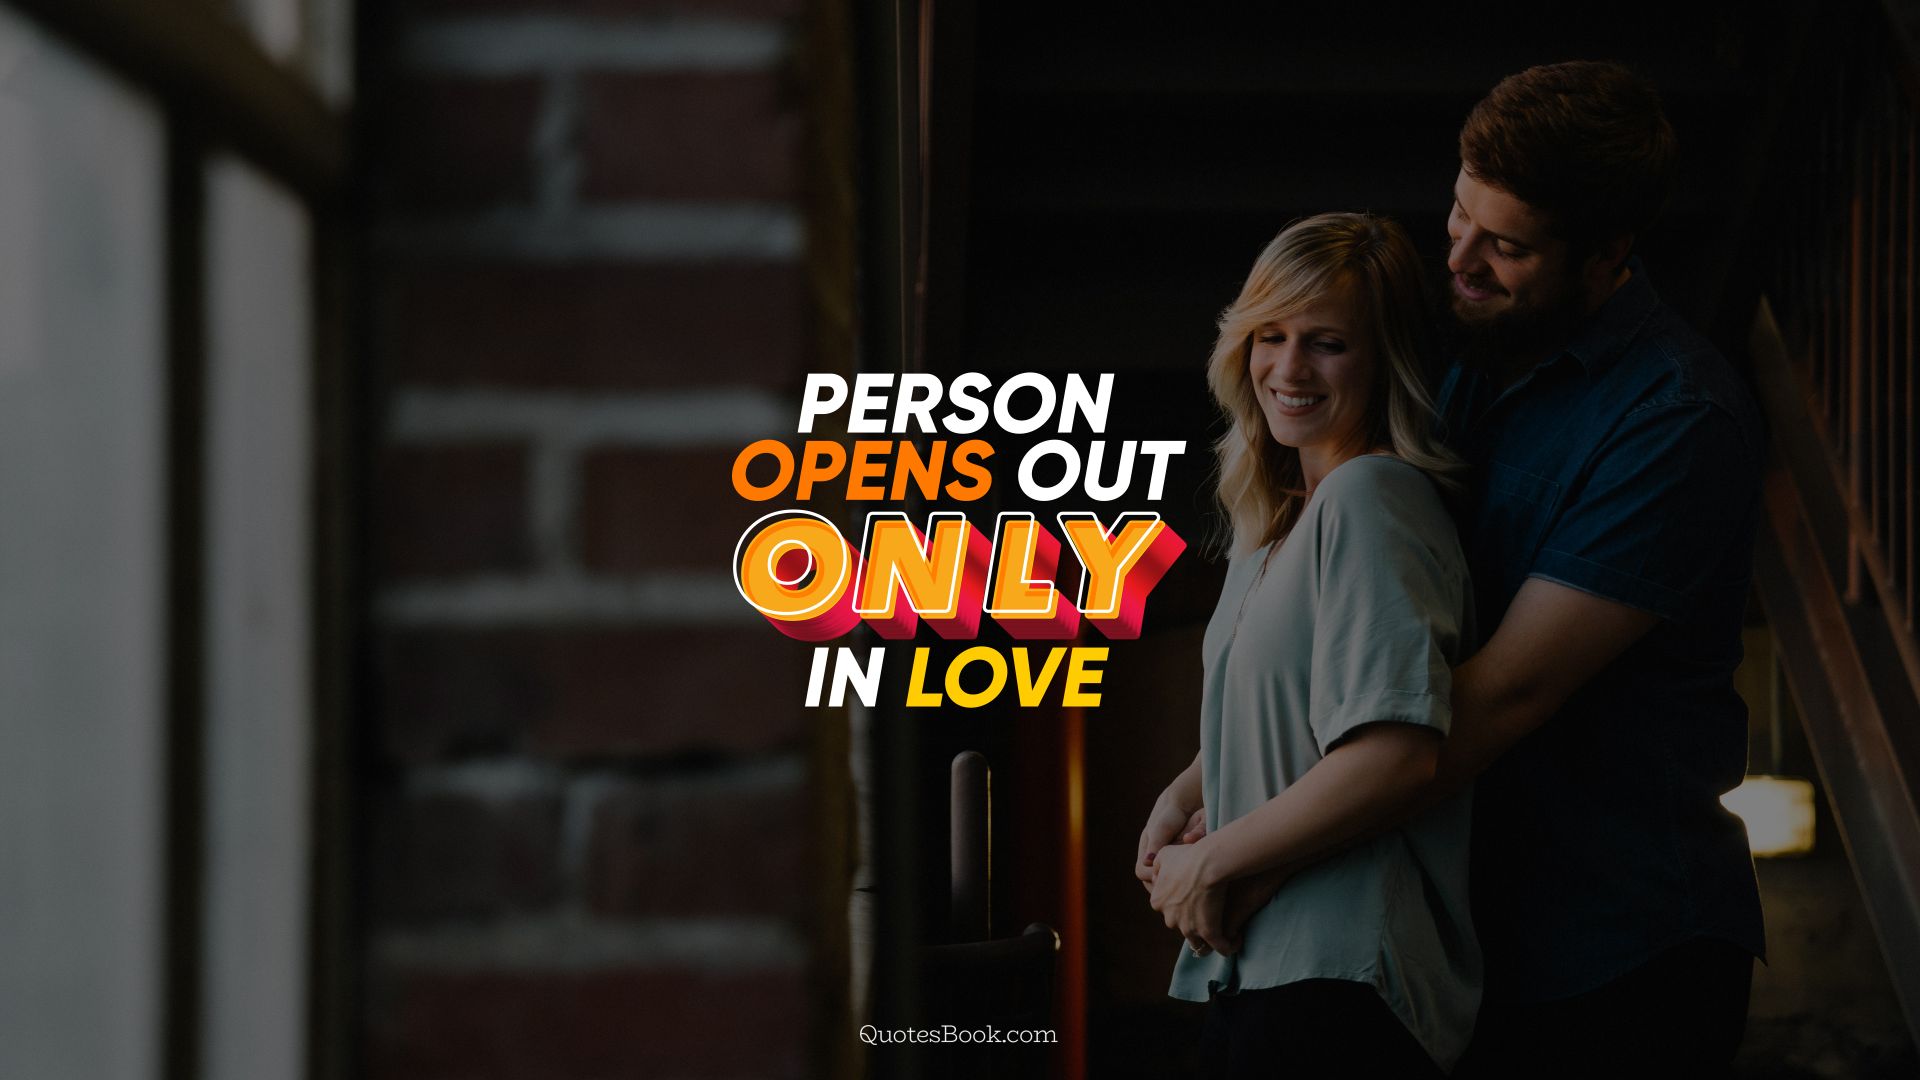 Person opens out only in love. - Quote by QuotesBook